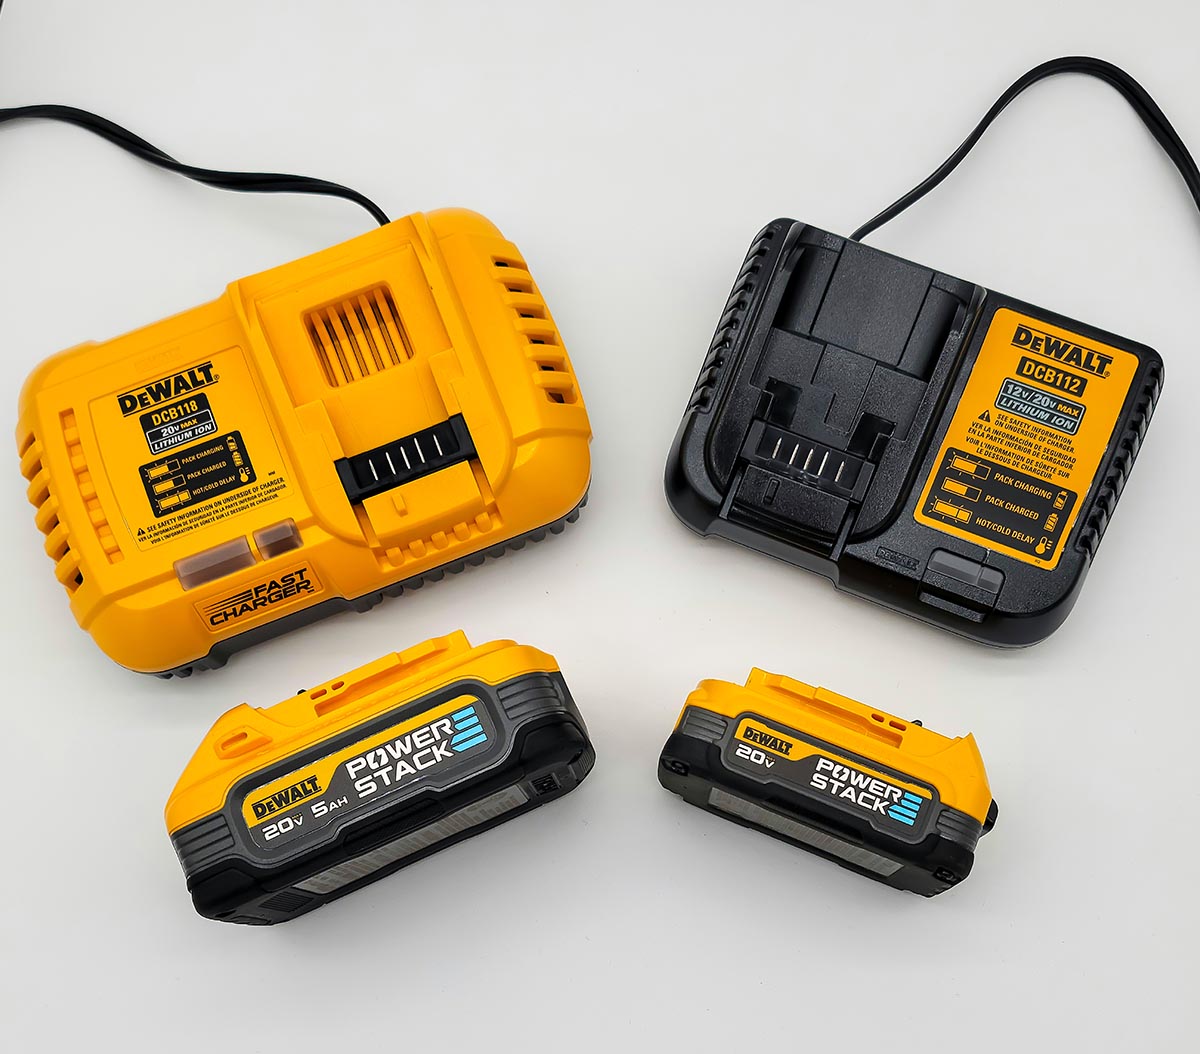 Two DeWalt PowerStack Batteries and chargers pictured side by side